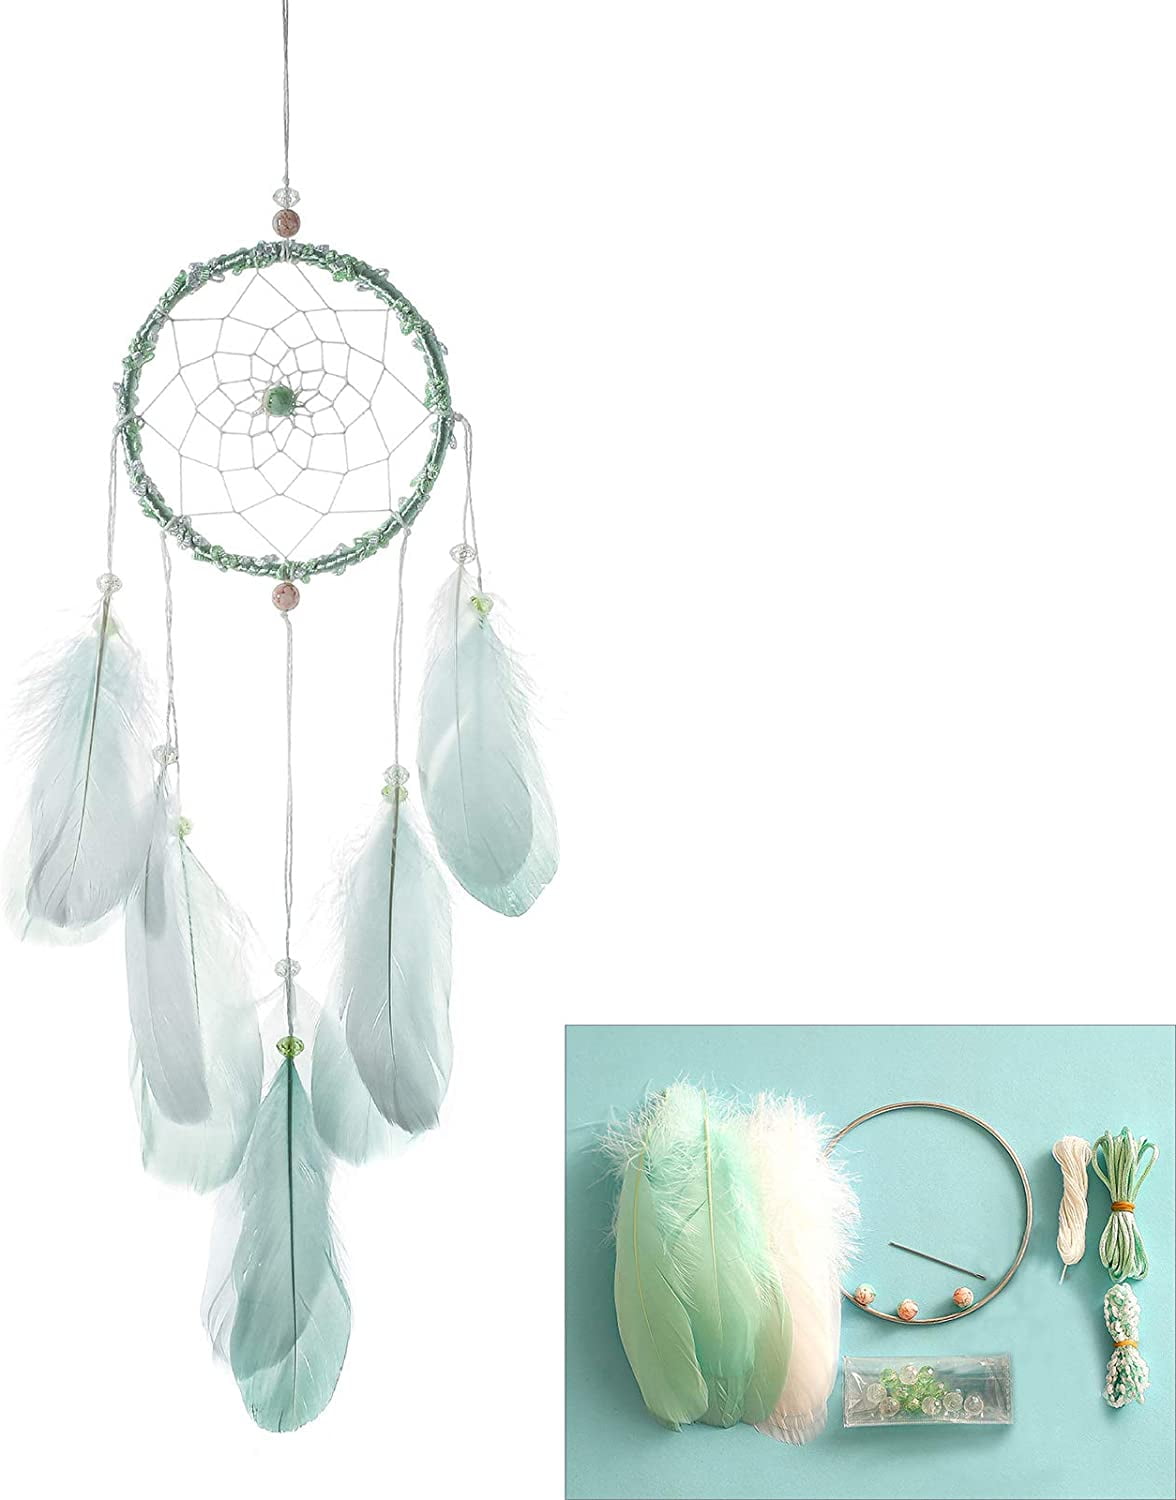 Dream Catcher Craft Kit for Kids - Makes 12 Dream Catchers - Individually  Packaged - DIY Crafts and Home Activities